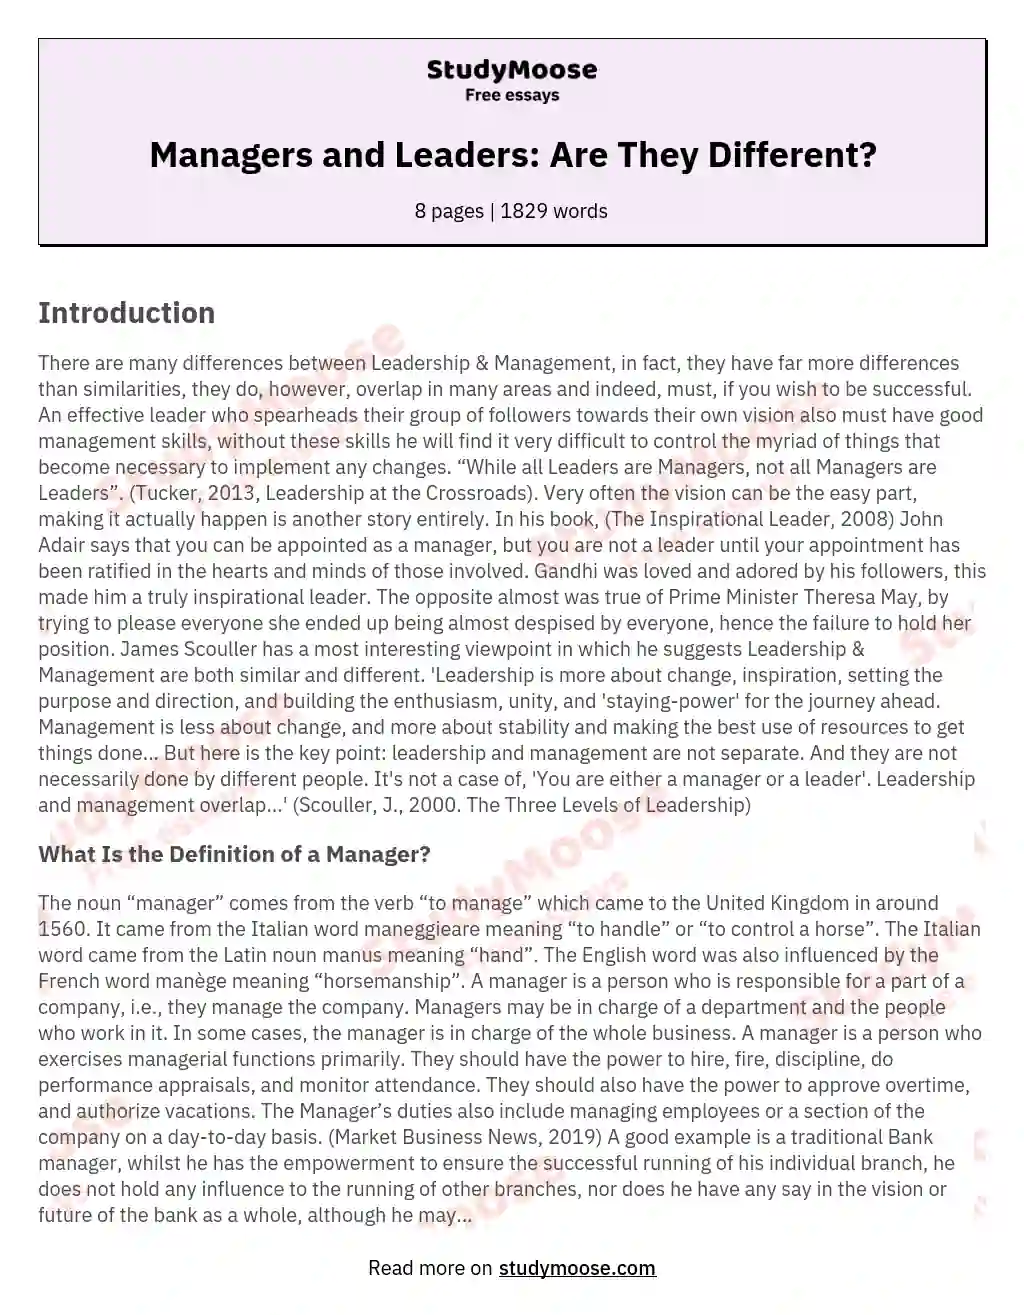 Managers and Leaders: Are They Different? essay